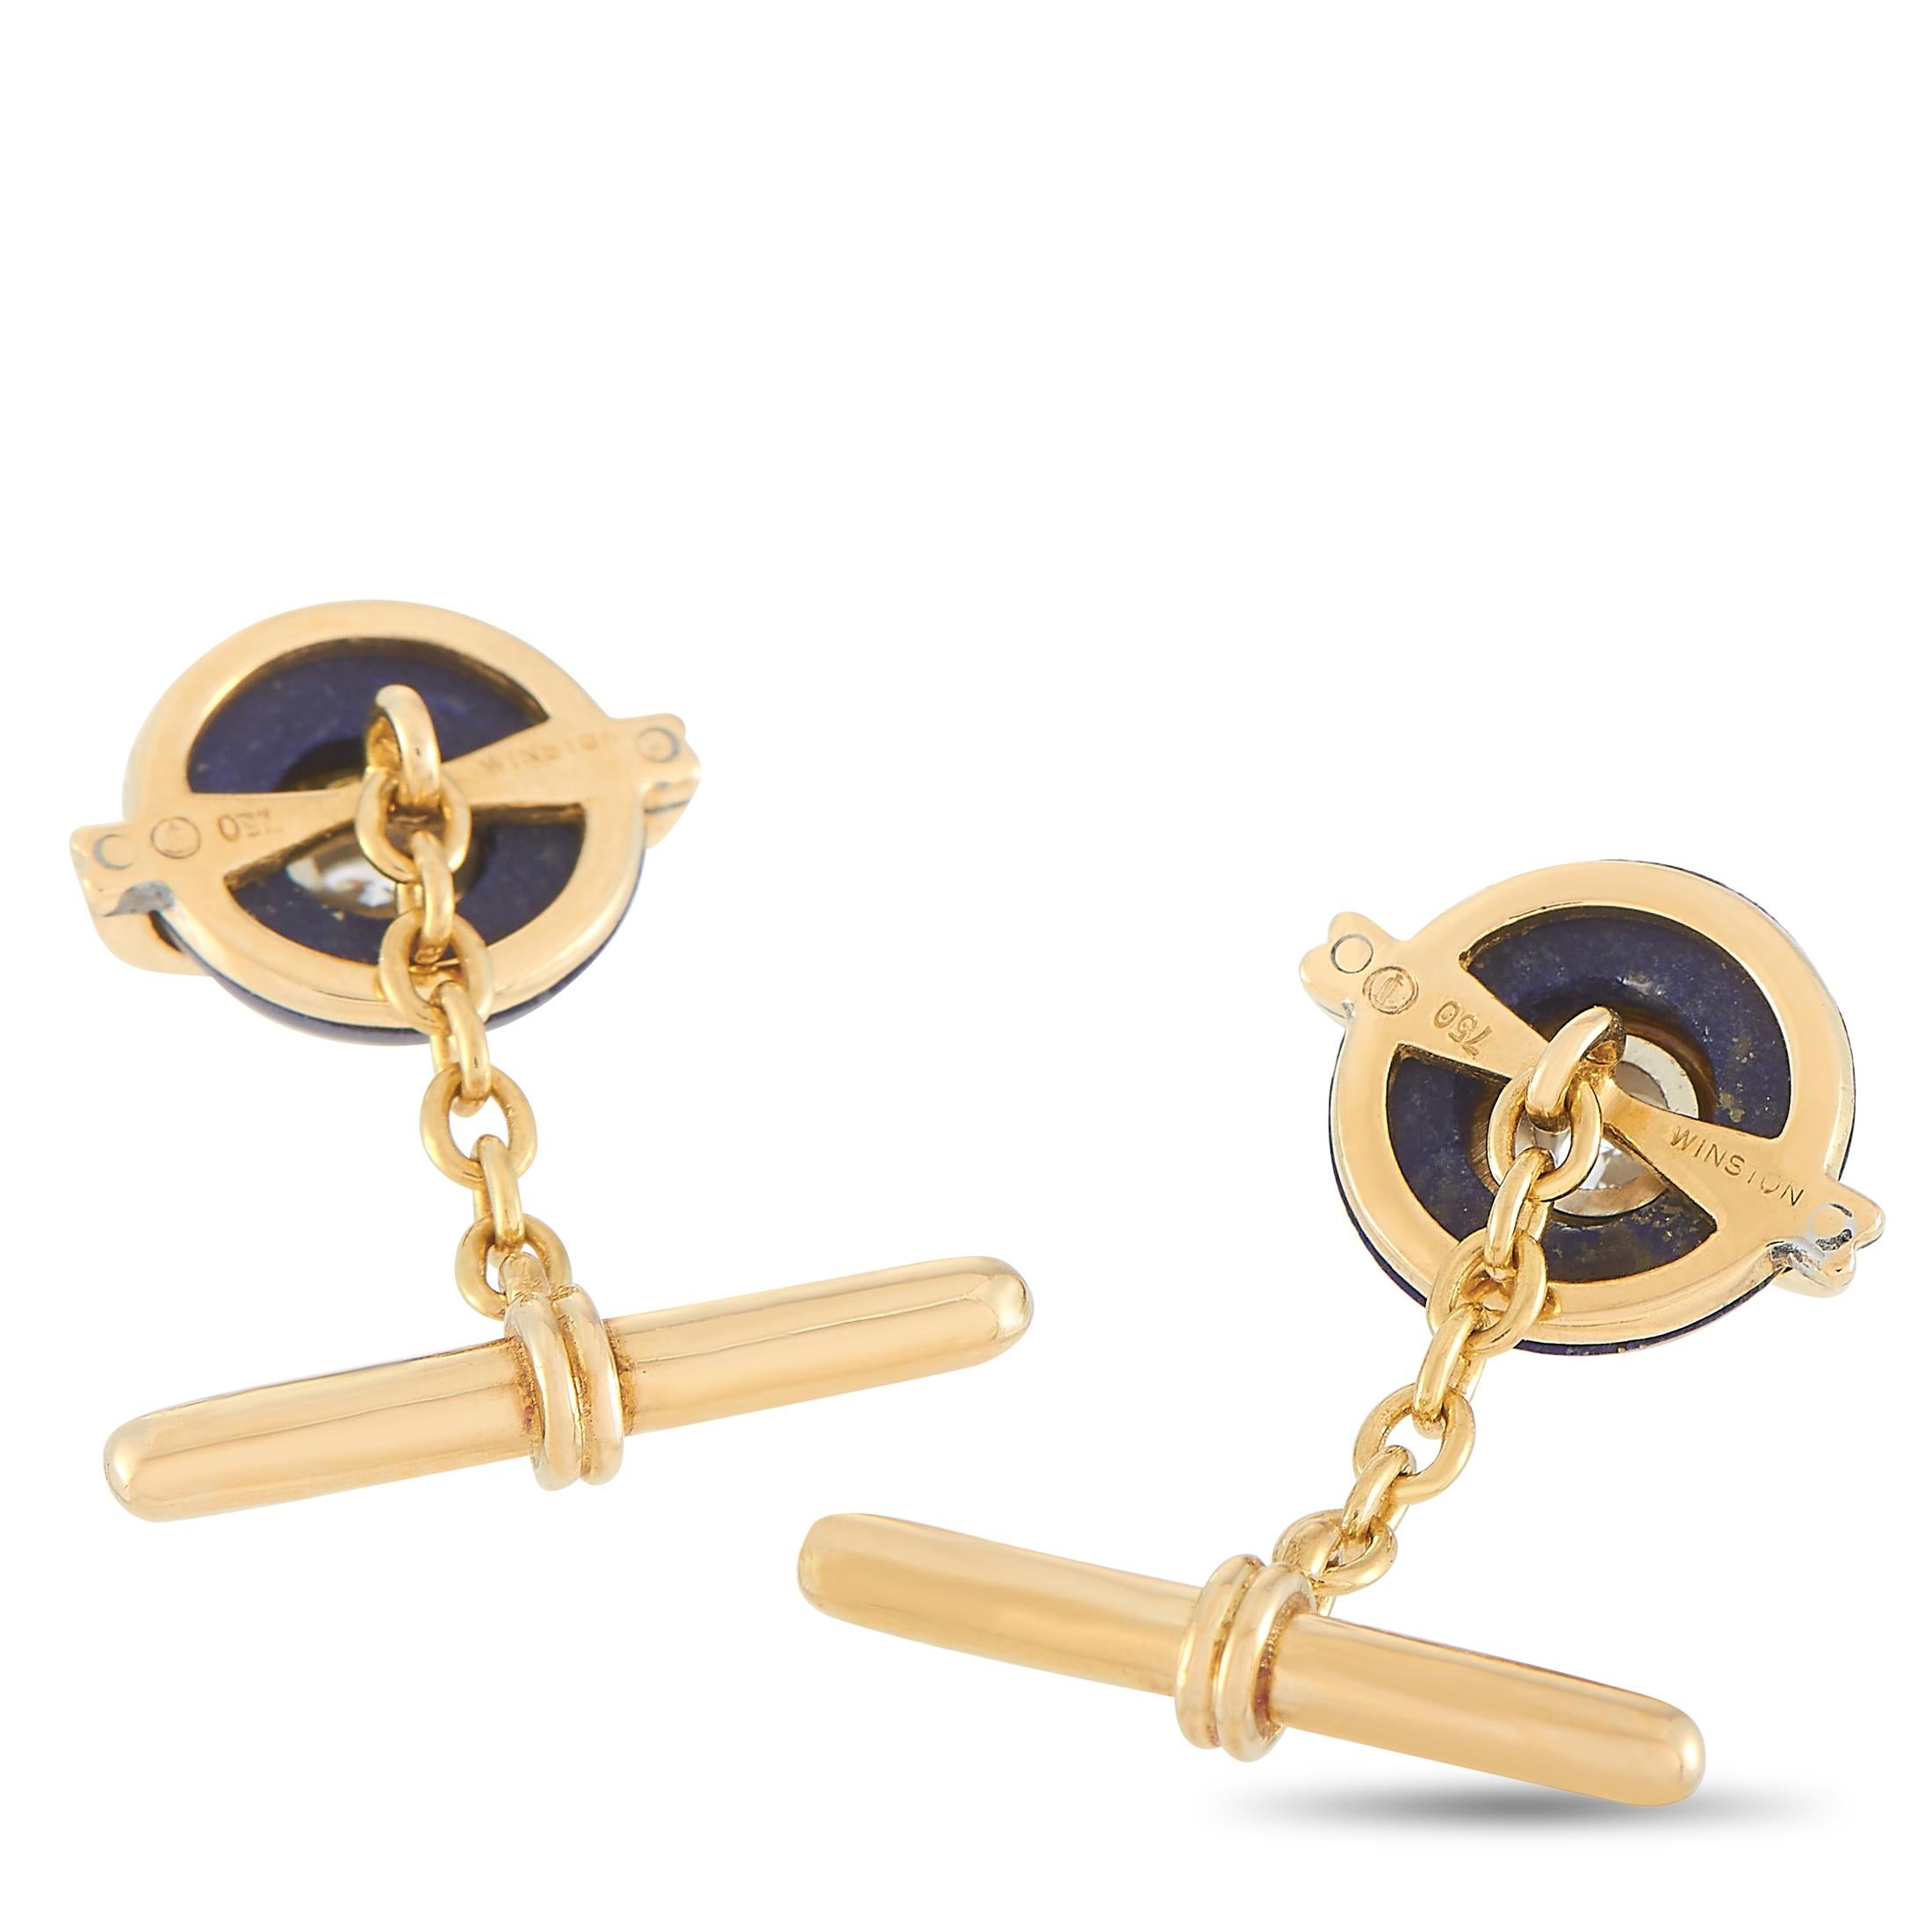 This pair of chain link cufflinks is crafted in 18k yellow gold and features a round royal blue Lapis Lazuli front face with gold flakes. Set on each of the cufflink's center is a diamond. The back of the cufflink is stamped with 